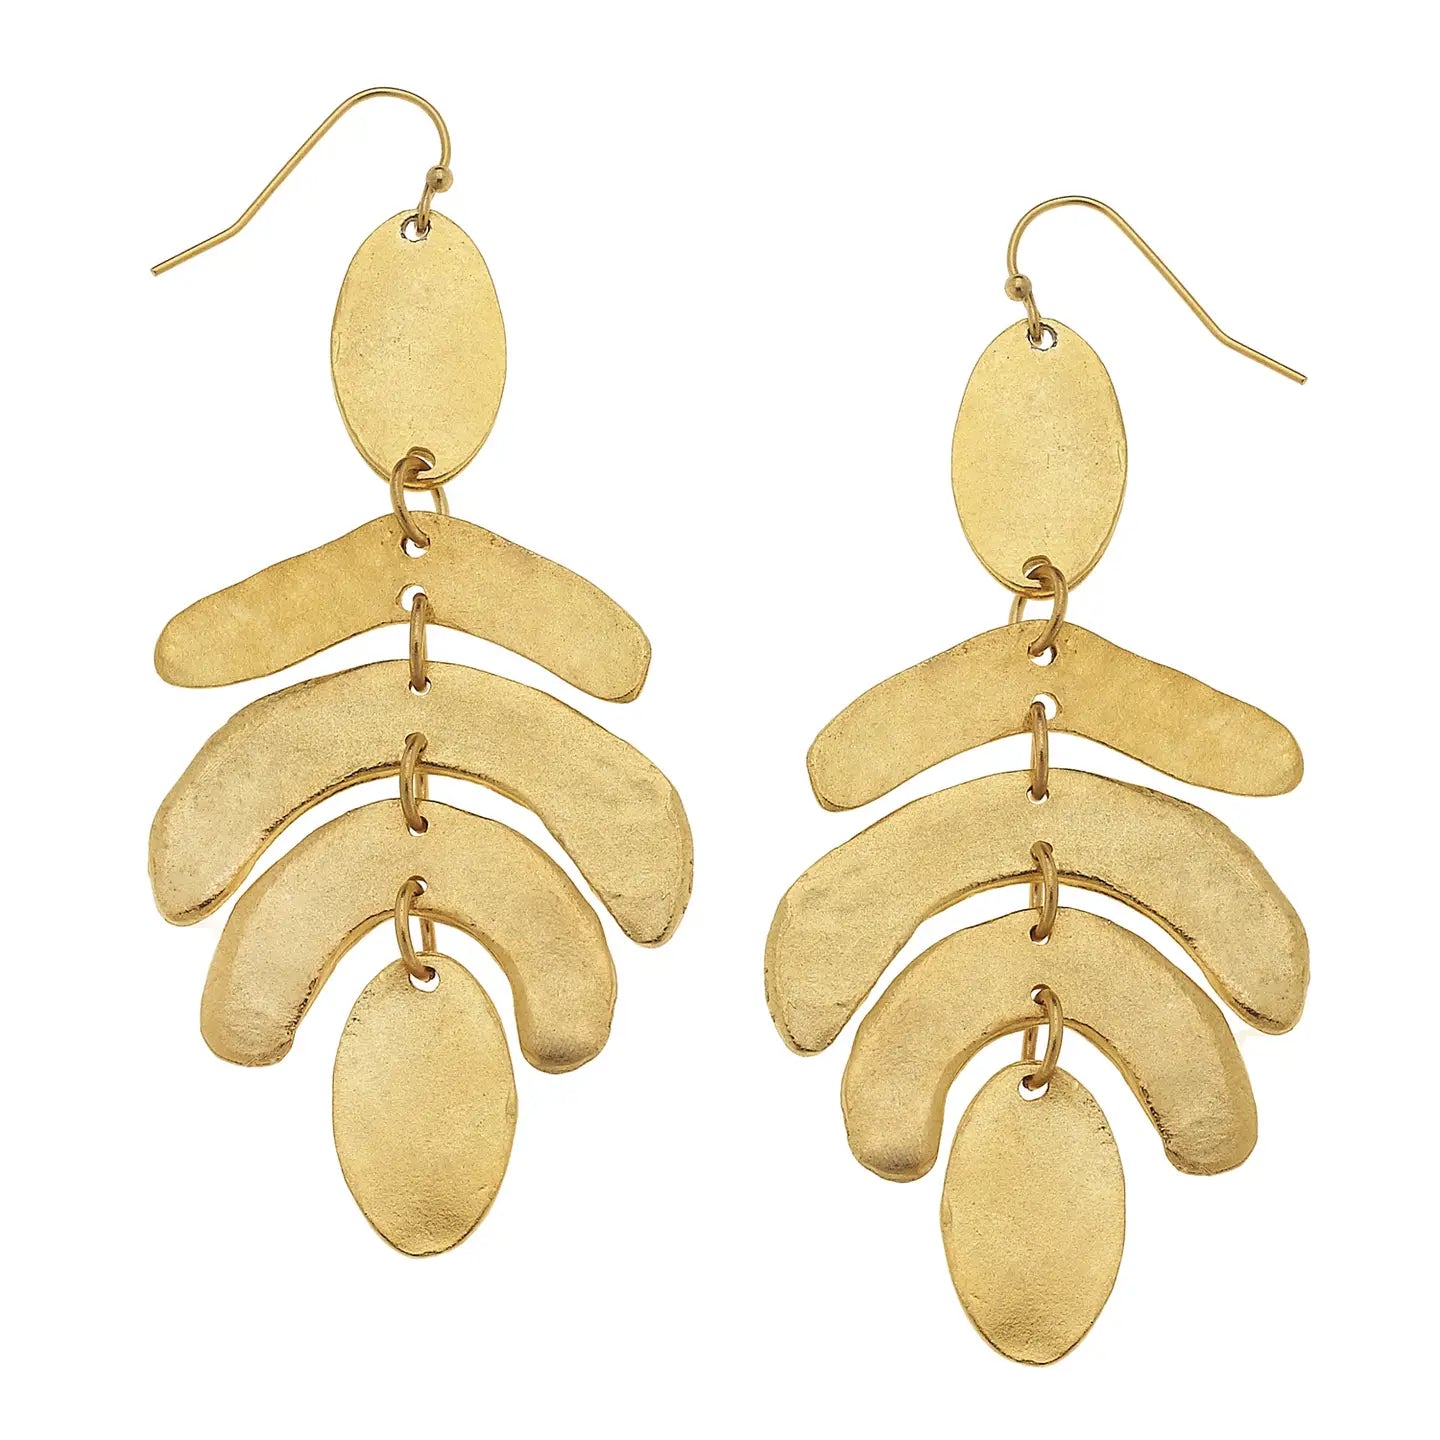 Gold Oval and Curve Contemporary Art Inspired Earrings